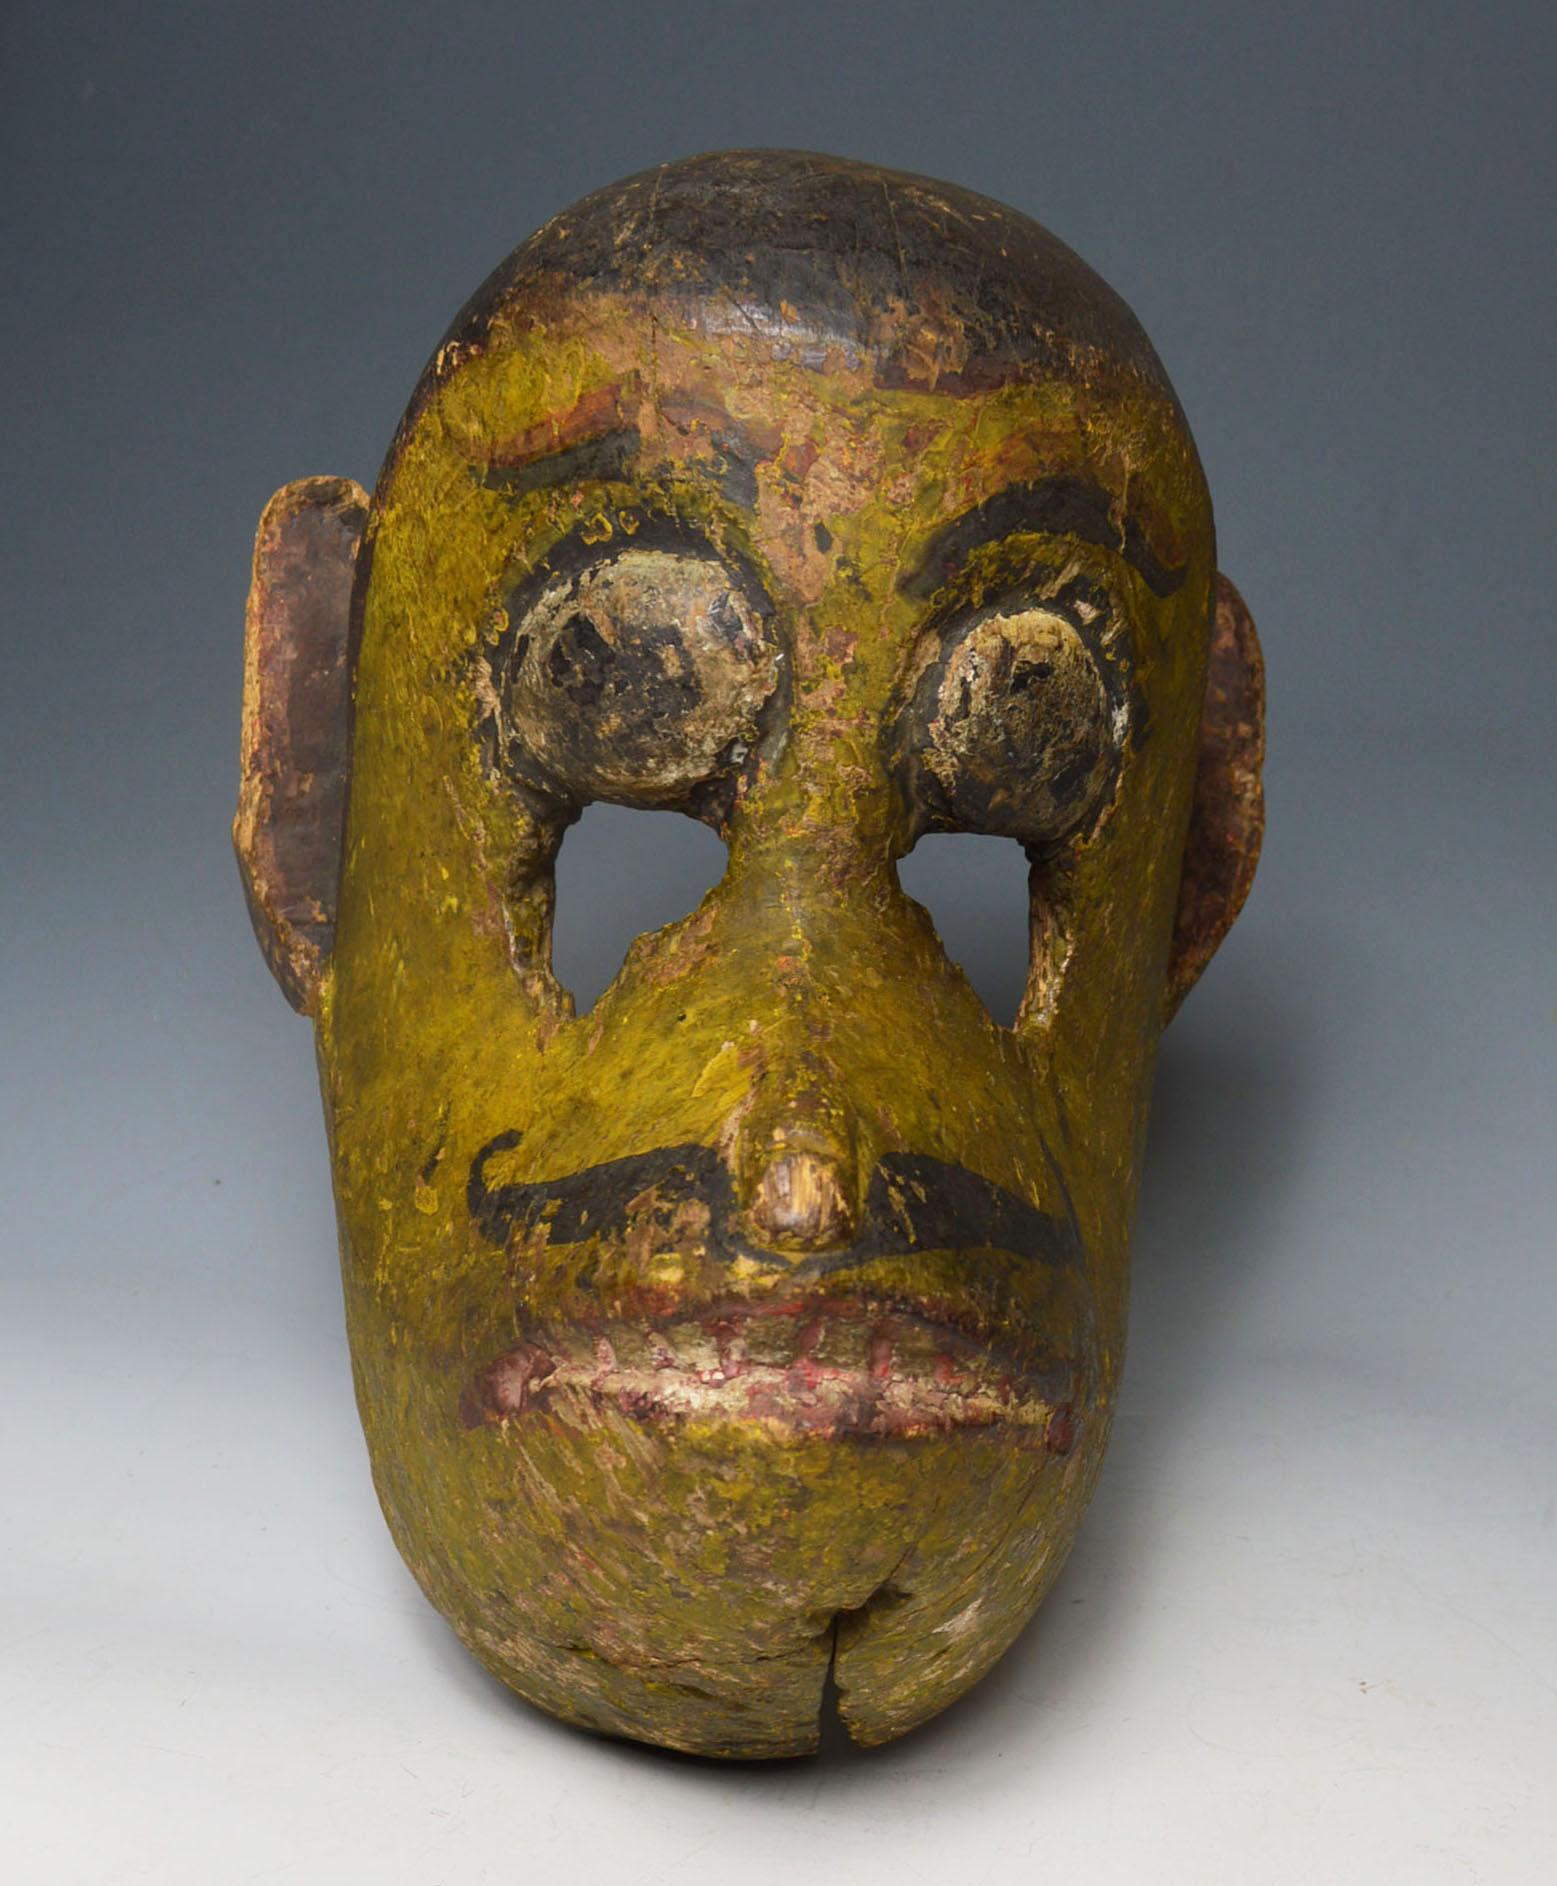 Superb Antique Nepalese Temple Mask of Hanuman the Monkey God In Good Condition For Sale In London, GB